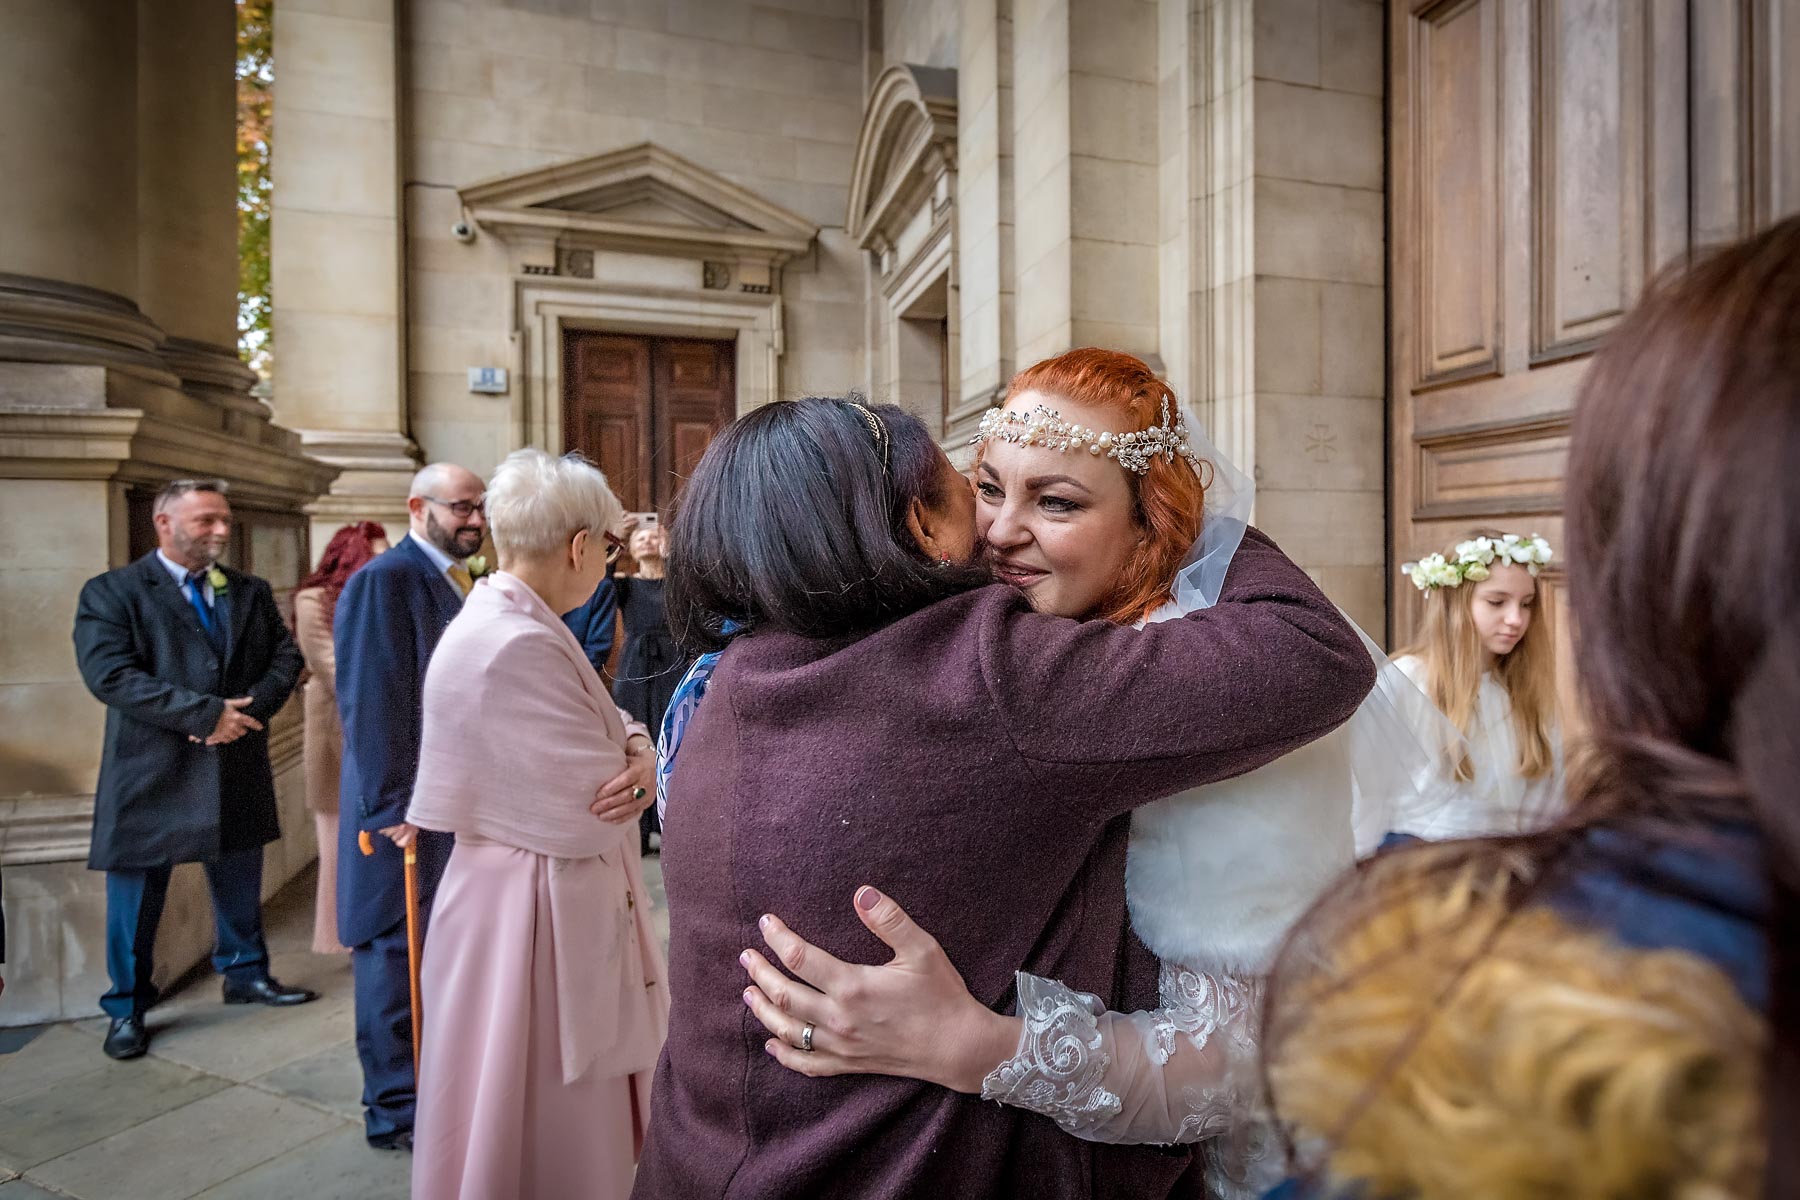 The bride hugs a guest outside Brompton Oratory after her marriage ceremony